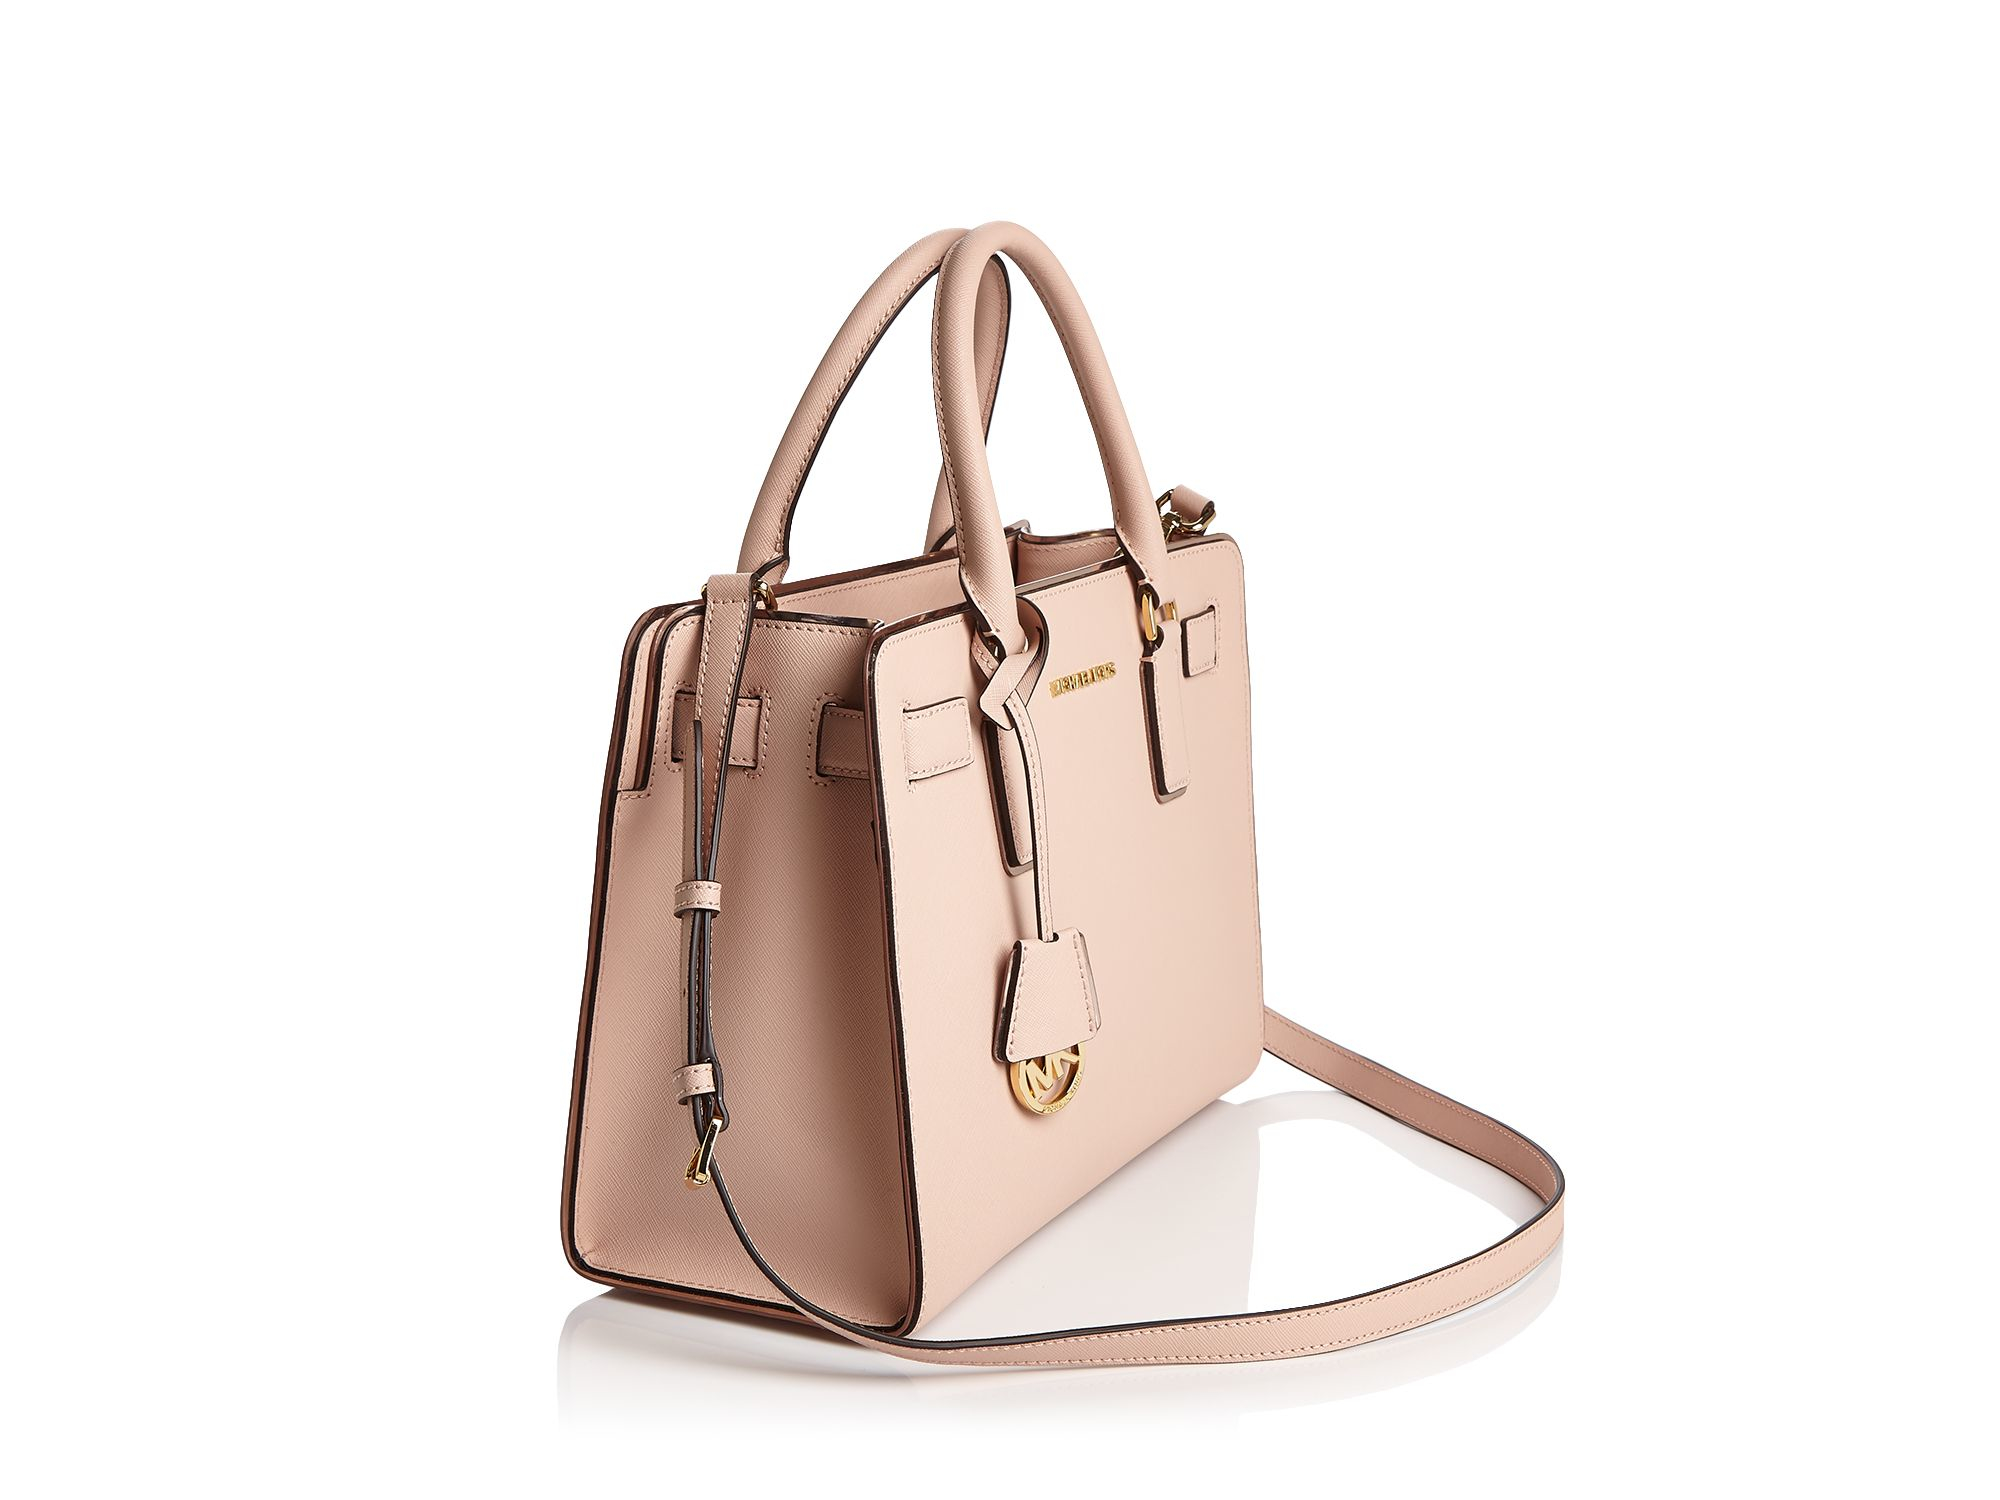 MICHAEL Michael Kors Dillon Saffiano-Leather Satchel in Pink - Lyst